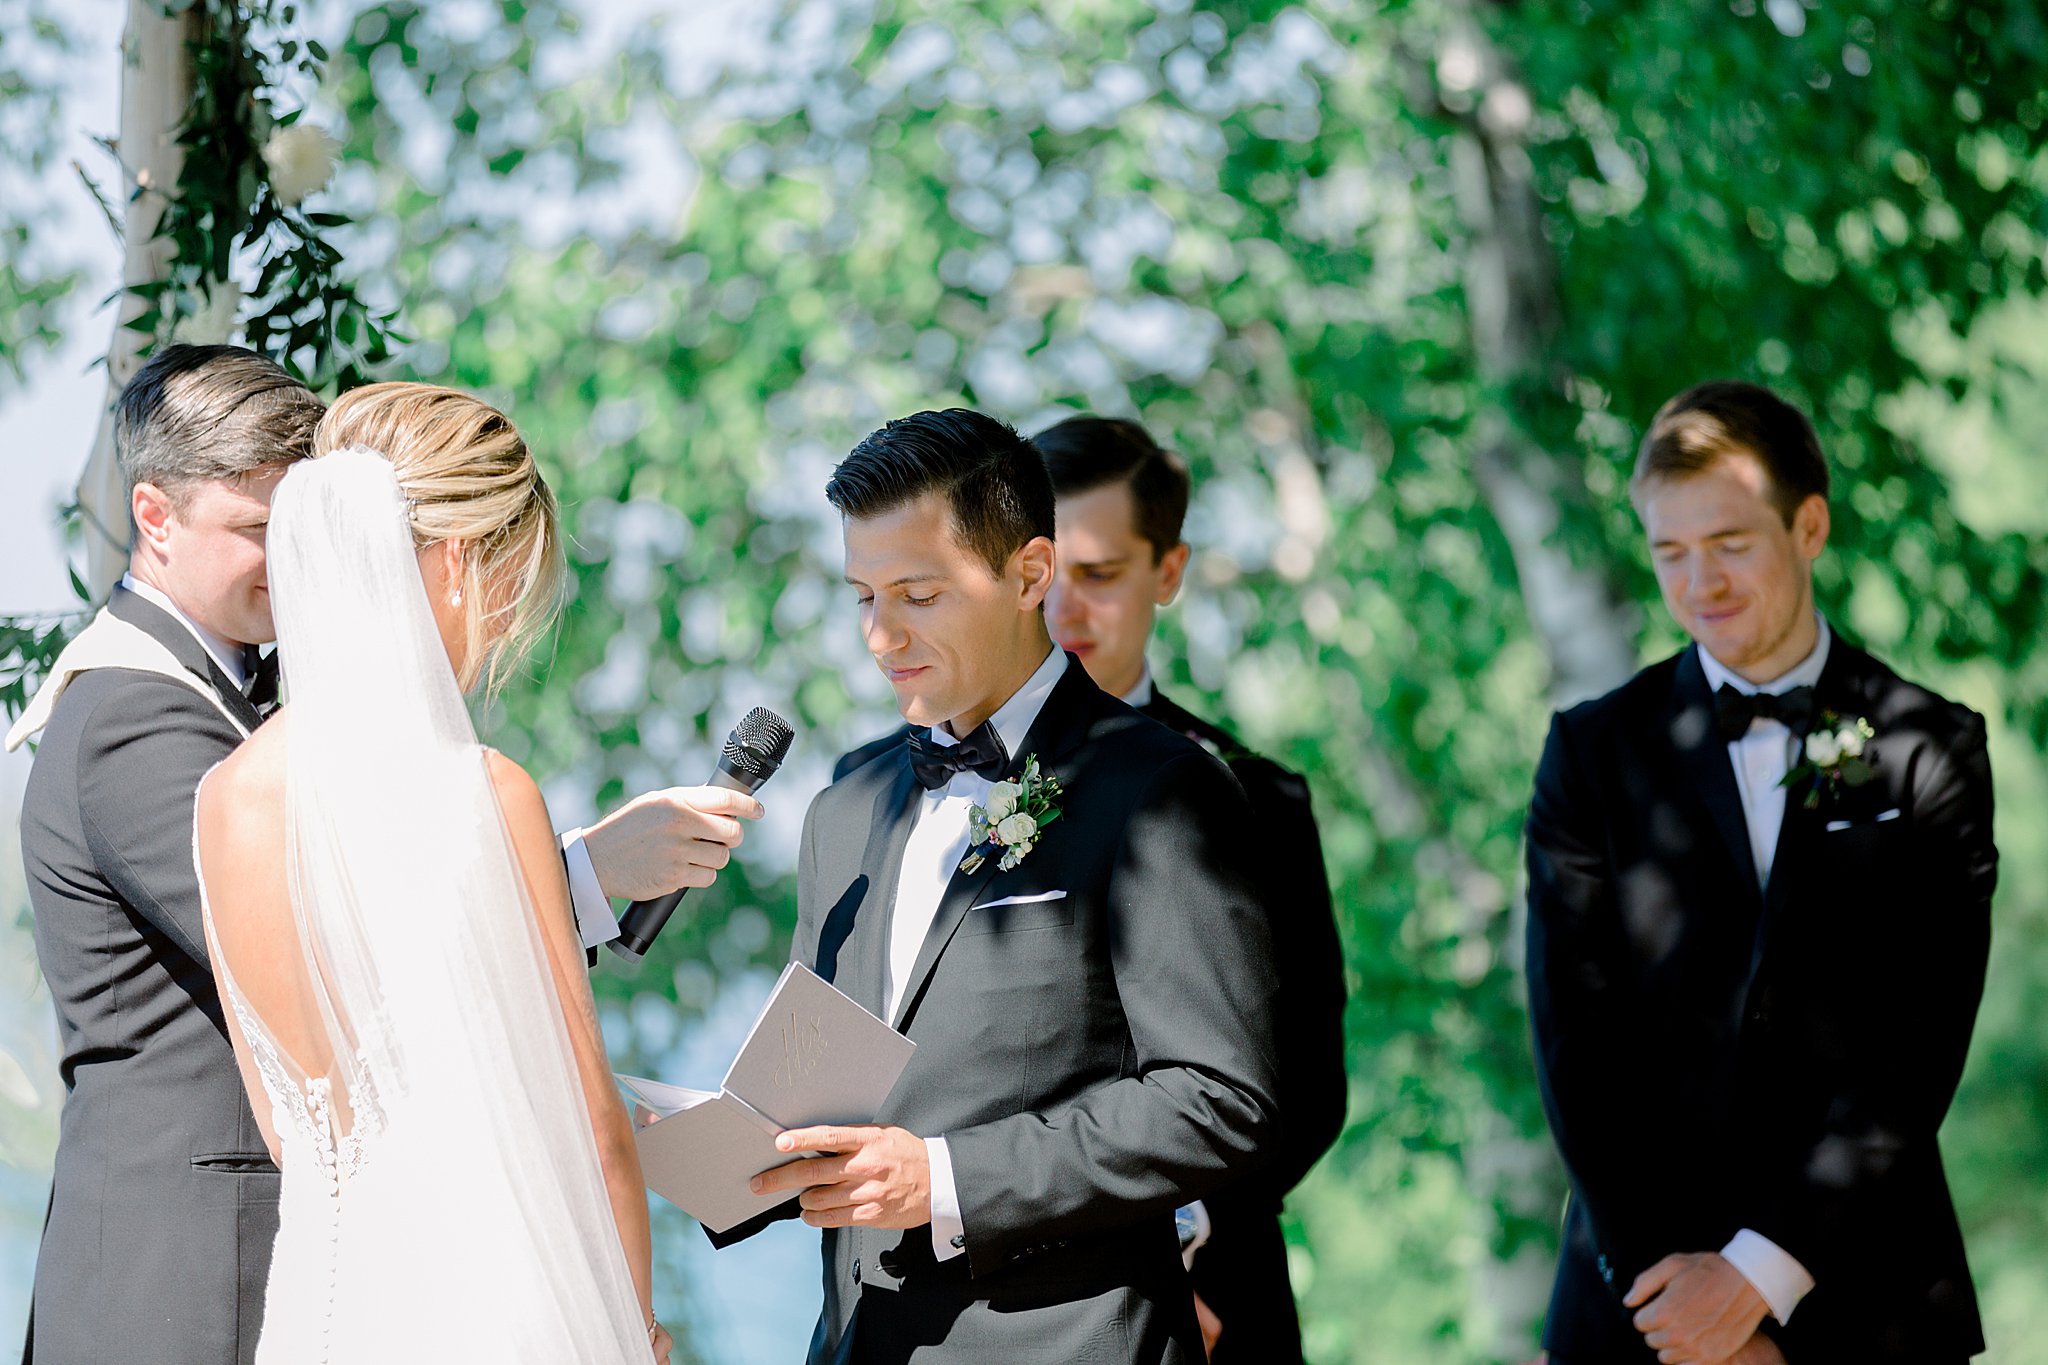 Groom reads vows during intimate Lake Michigan wedding ceremony.